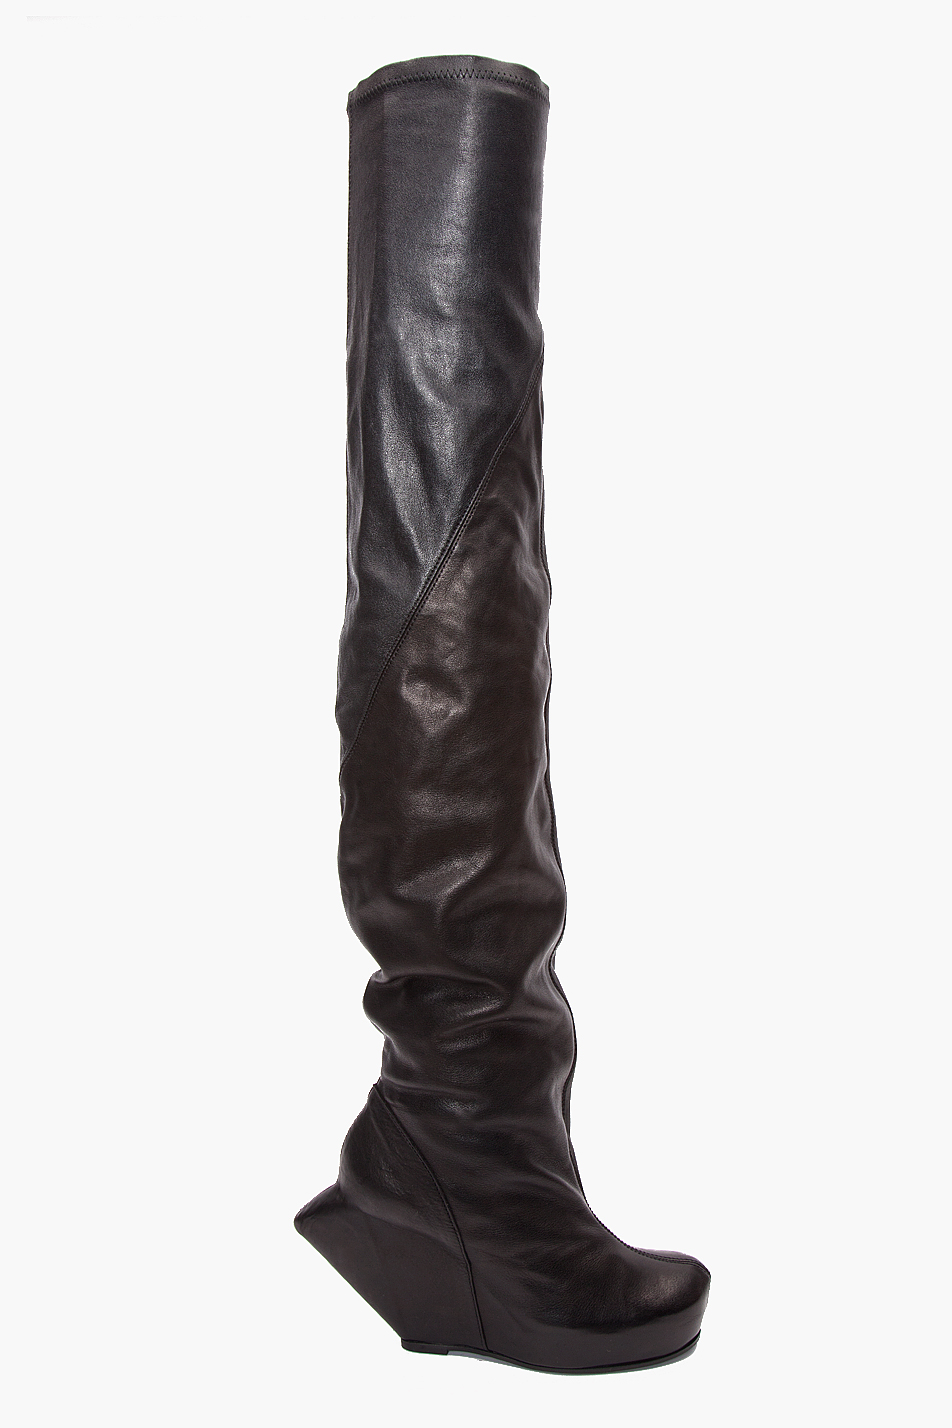 Rick Owens Thigh-high Spike Wedge Boots in Black | Lyst